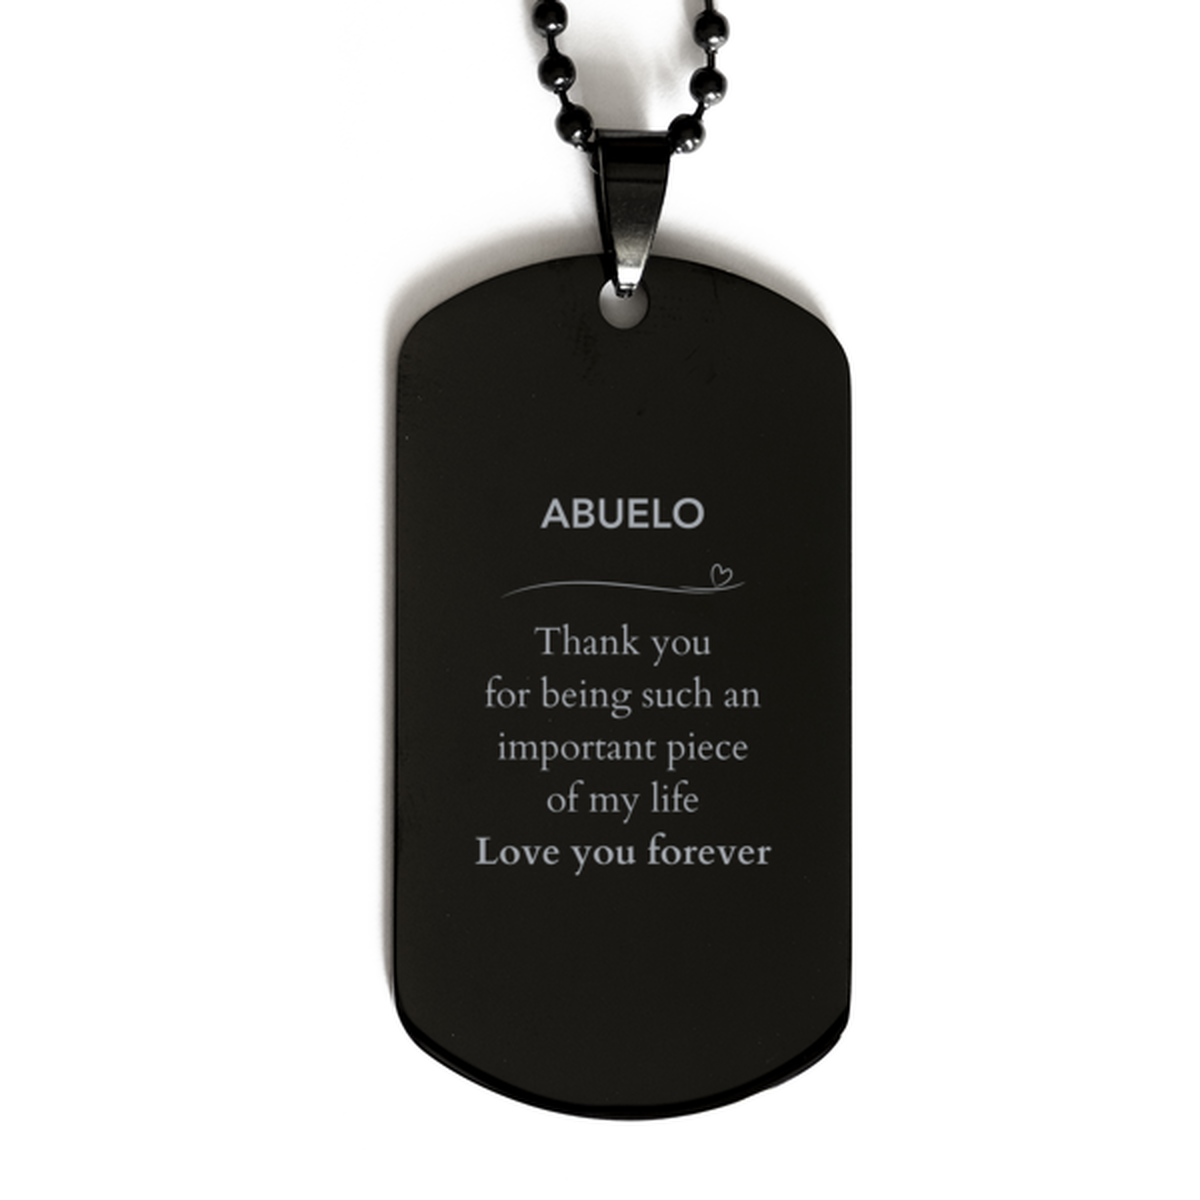 Appropriate Abuelo Black Dog Tag Epic Birthday Gifts for Abuelo Thank you for being such an important piece of my life Abuelo Christmas Mothers Fathers Day